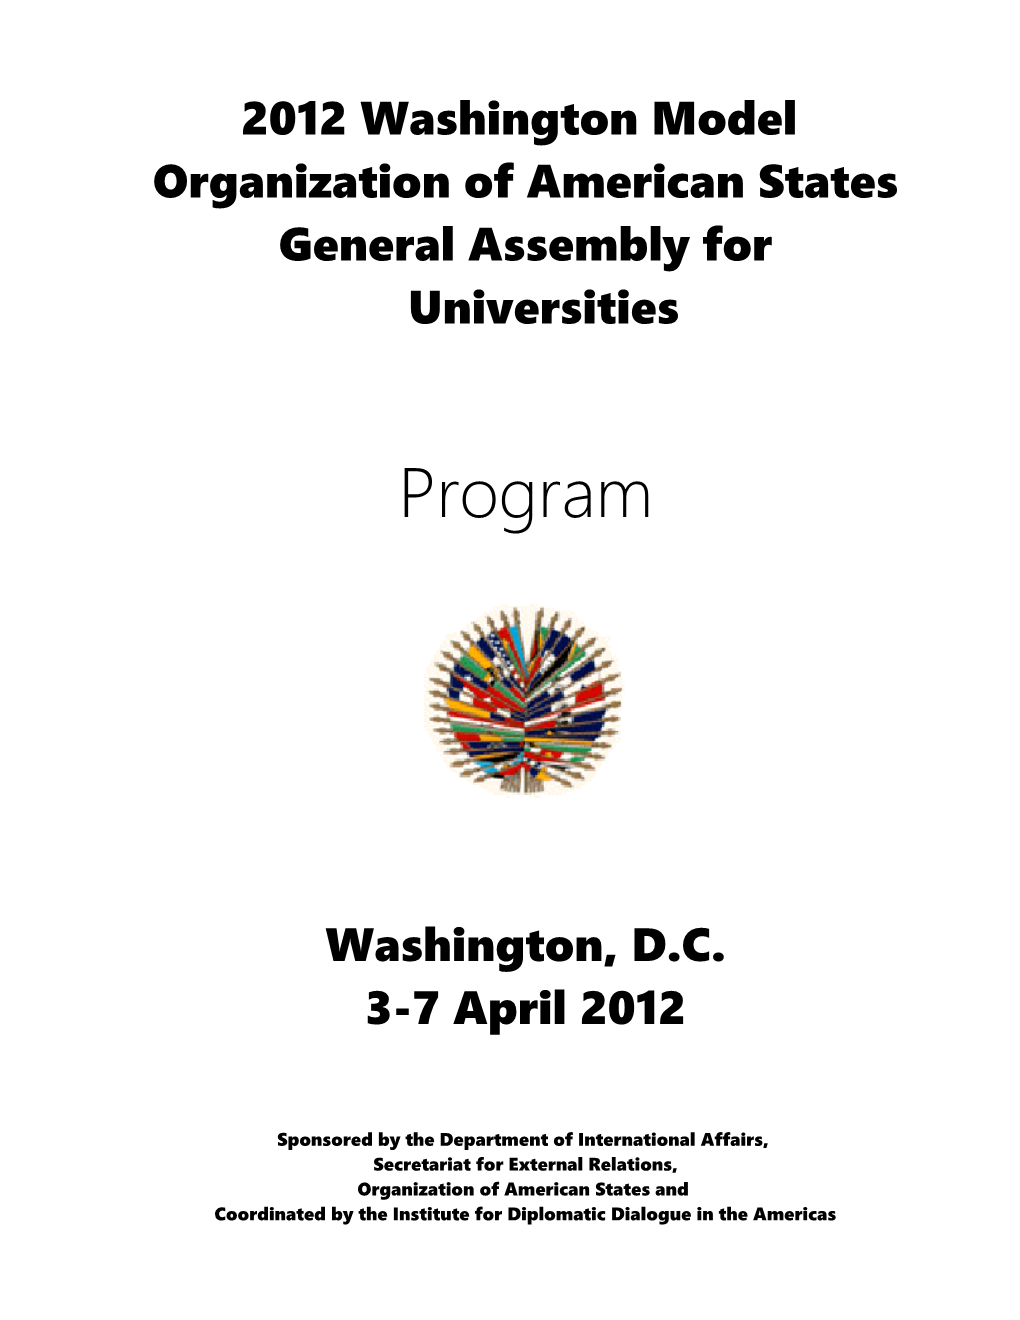 2002 Maya Model Organization of American States General Assembly for Universities